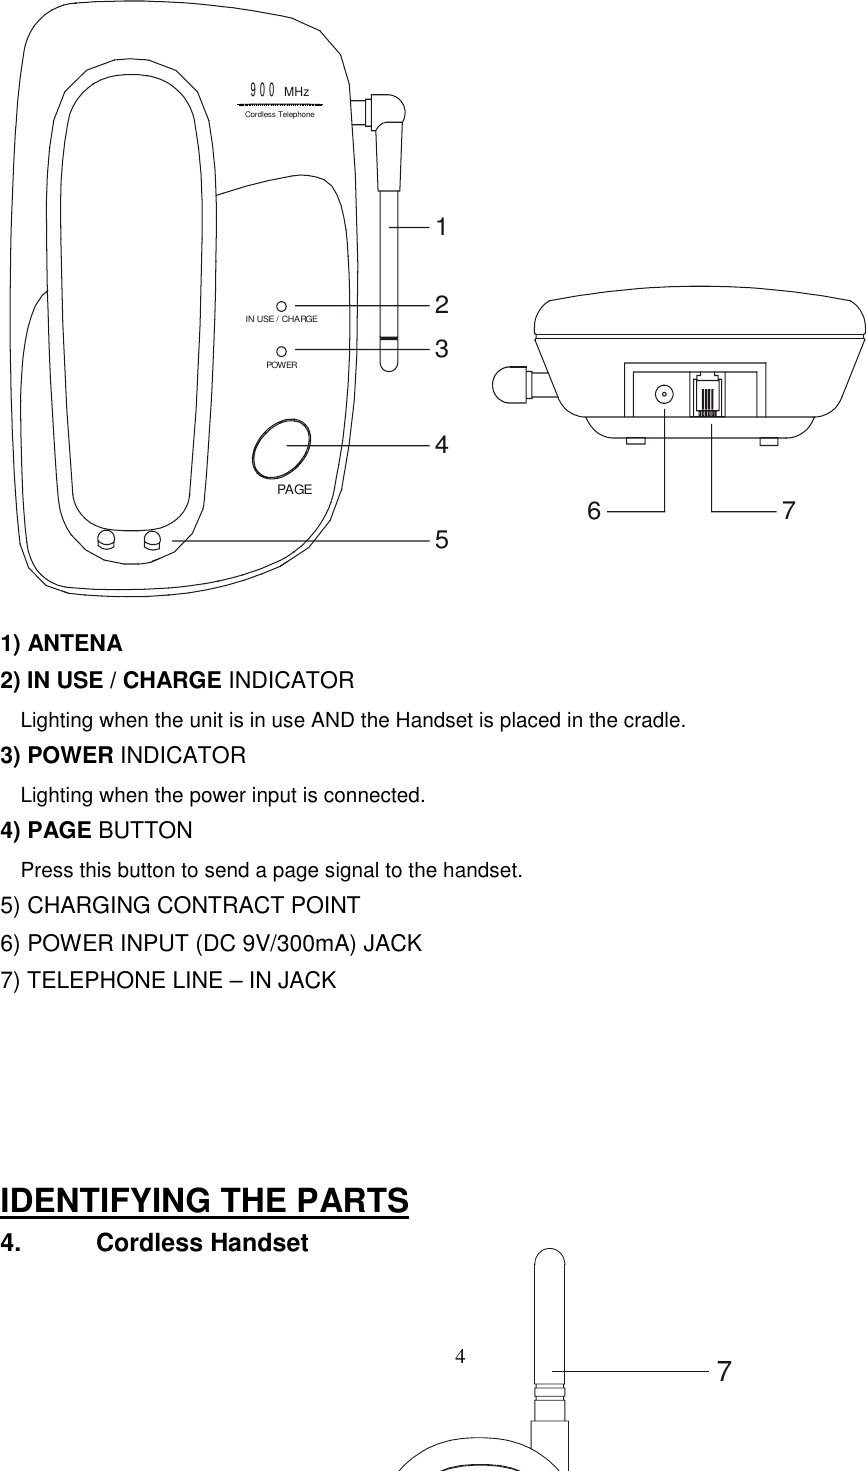 41) ANTENA2) IN USE / CHARGE INDICATORLighting when the unit is in use AND the Handset is placed in the cradle.3) POWER INDICATORLighting when the power input is connected.4) PAGE BUTTONPress this button to send a page signal to the handset.5) CHARGING CONTRACT POINT6) POWER INPUT (DC 9V/300mA) JACK7) TELEPHONE LINE – IN JACKIDENTIFYING THE PARTS4.   Cordless HandsetPAGEPOWERIN USE / CHARGE900 MHzCordless Telephone35647127